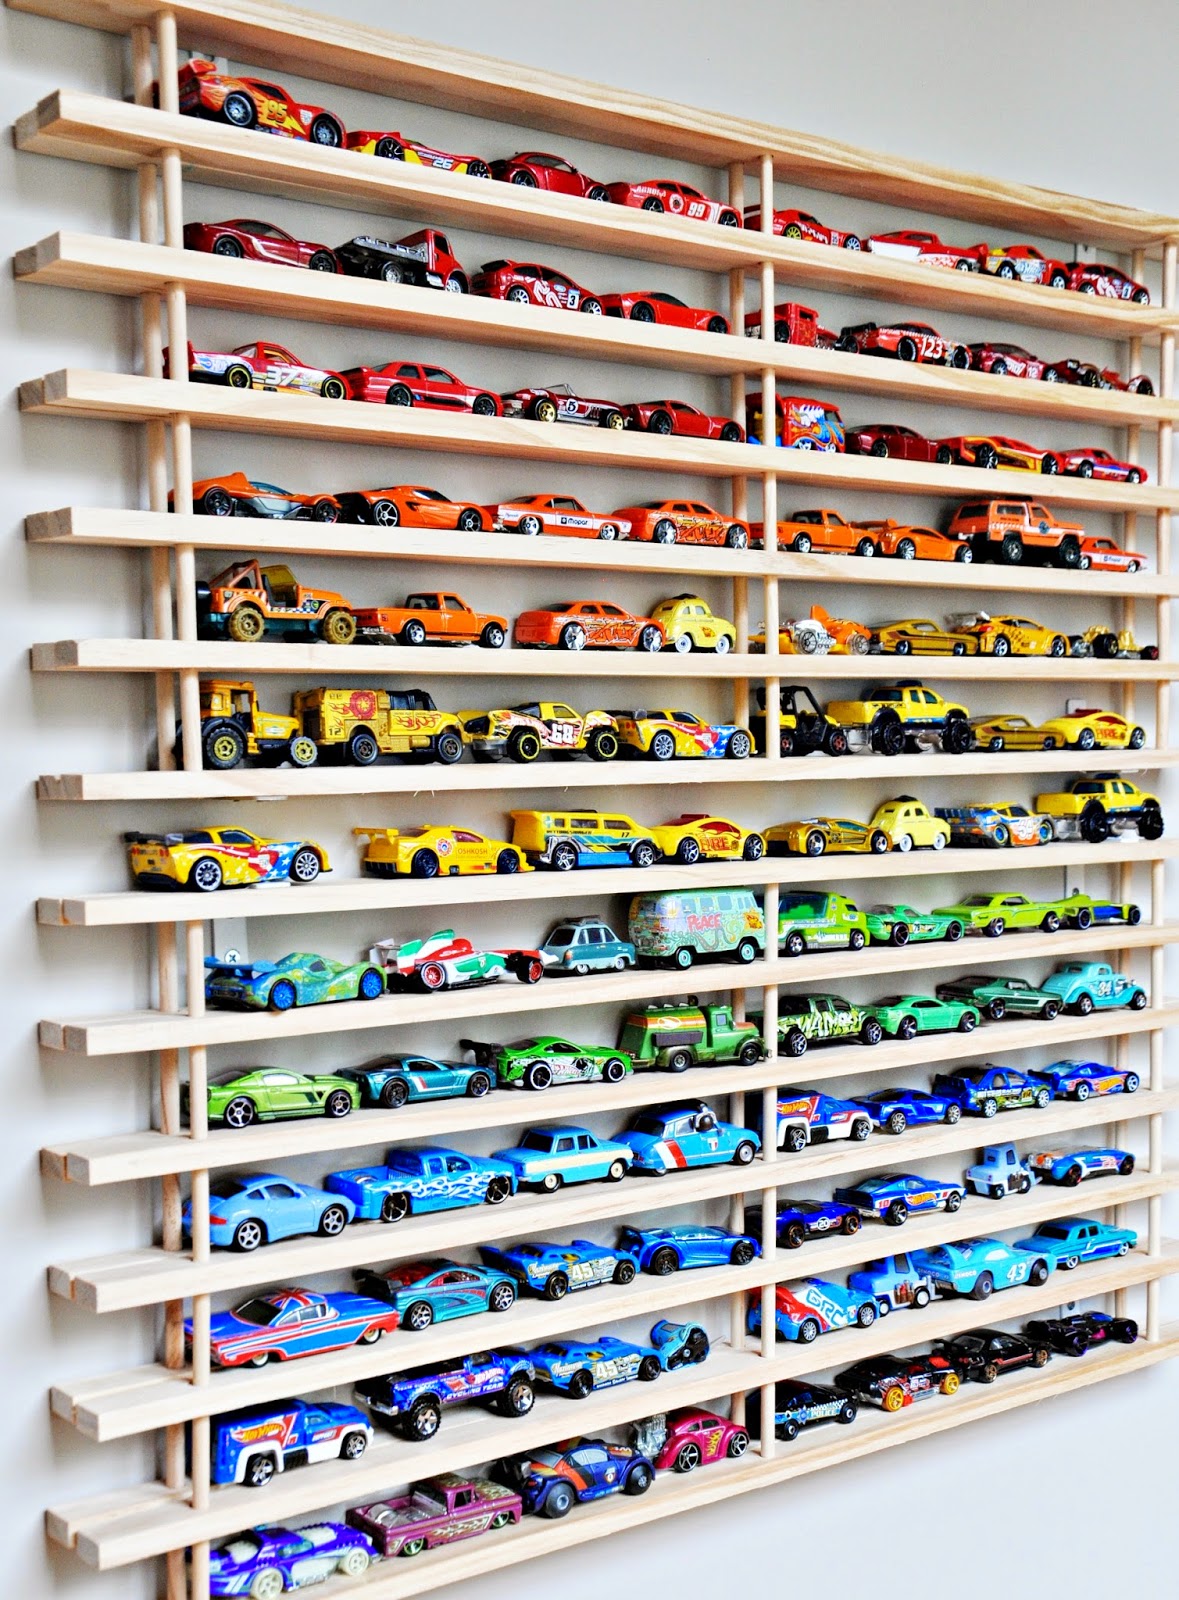 toy storage ideas for playroom